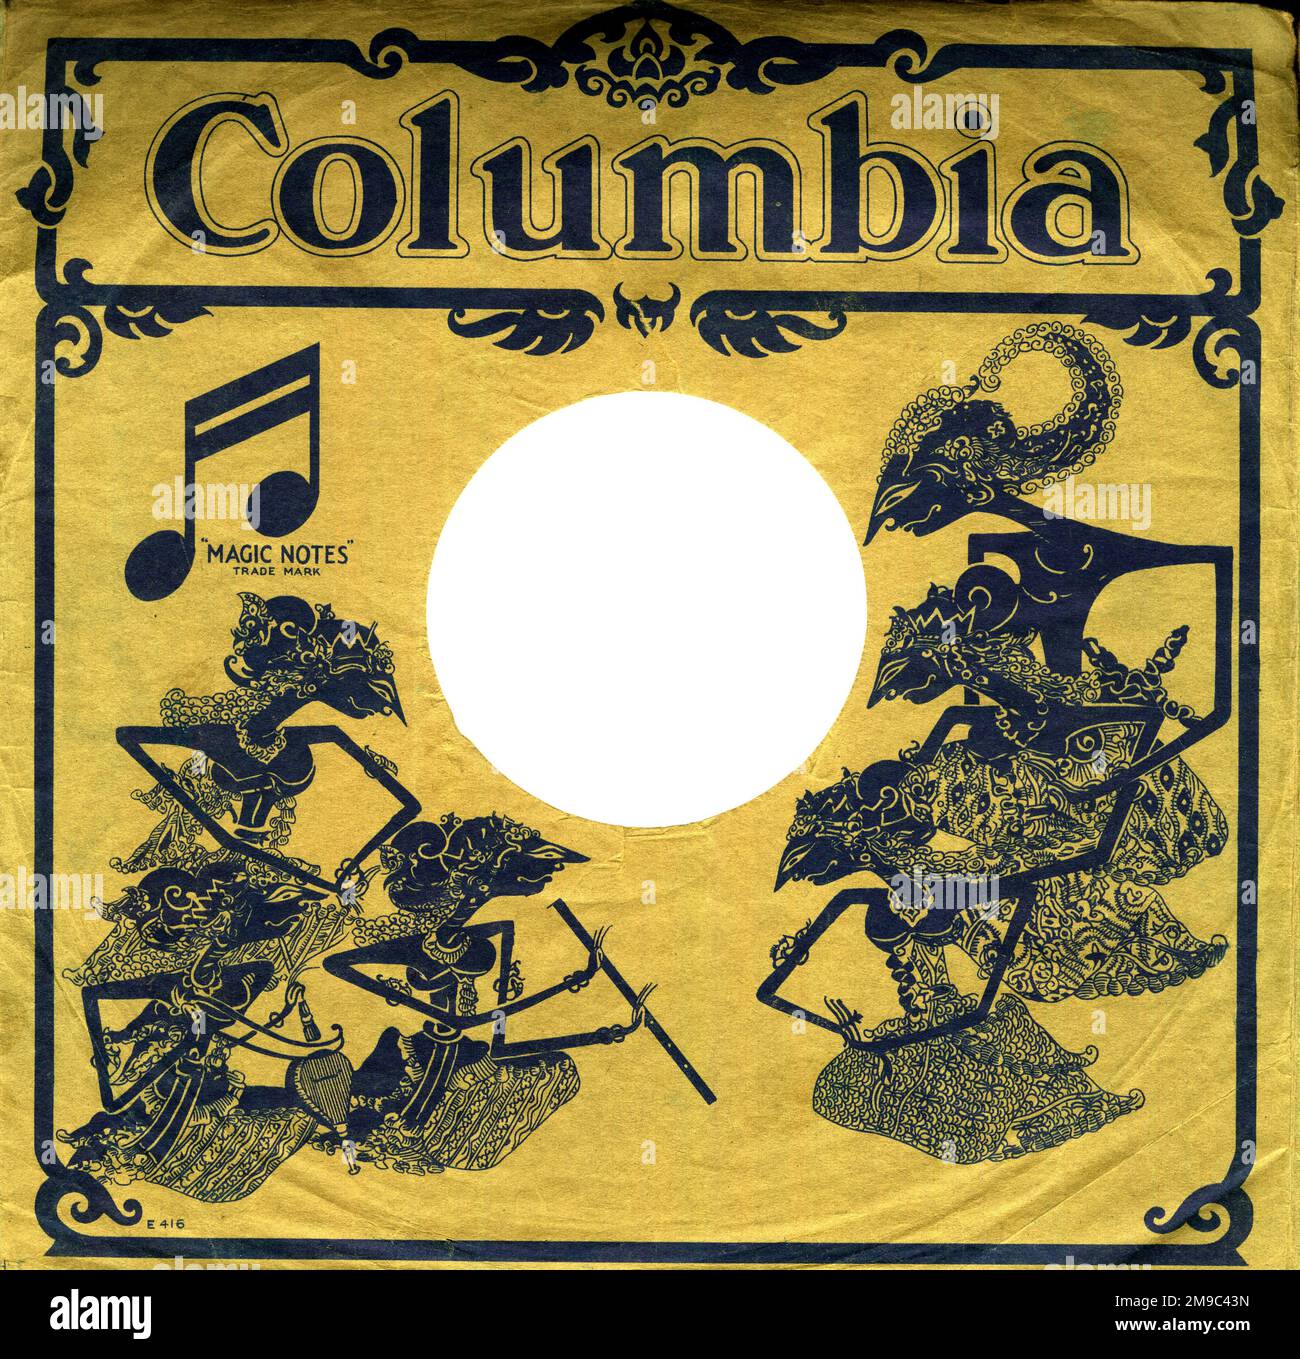 Javanese or Indonesian musicians on Columbia 78rpm record sleeve Stock Photo